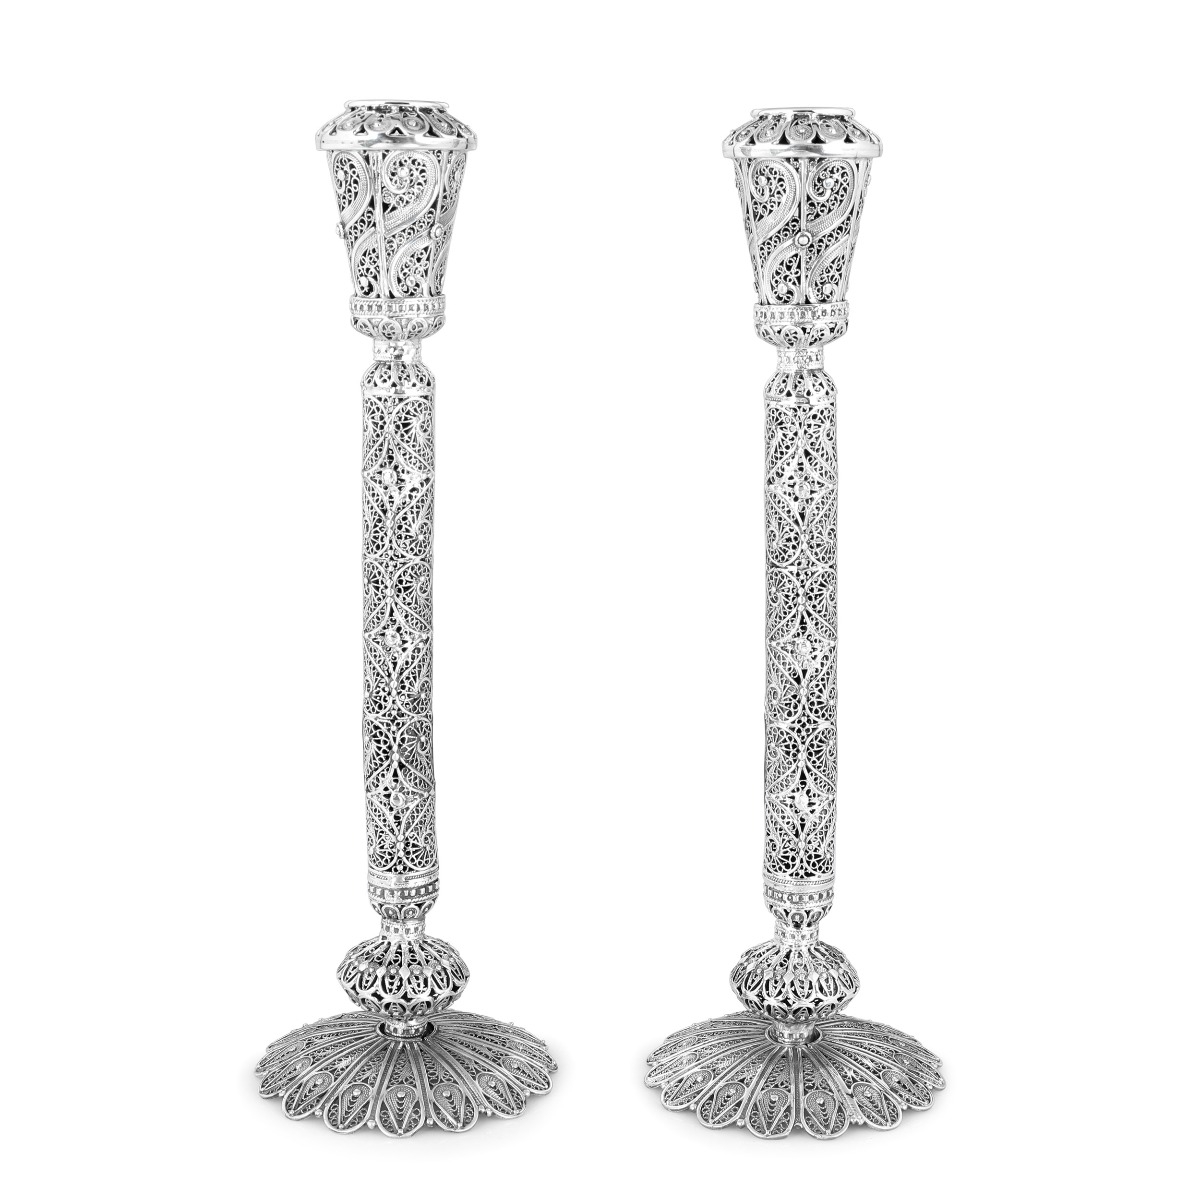 Traditional Yemenite Art Handcrafted Grand Sterling Silver Candlesticks With Filigree Design - 1